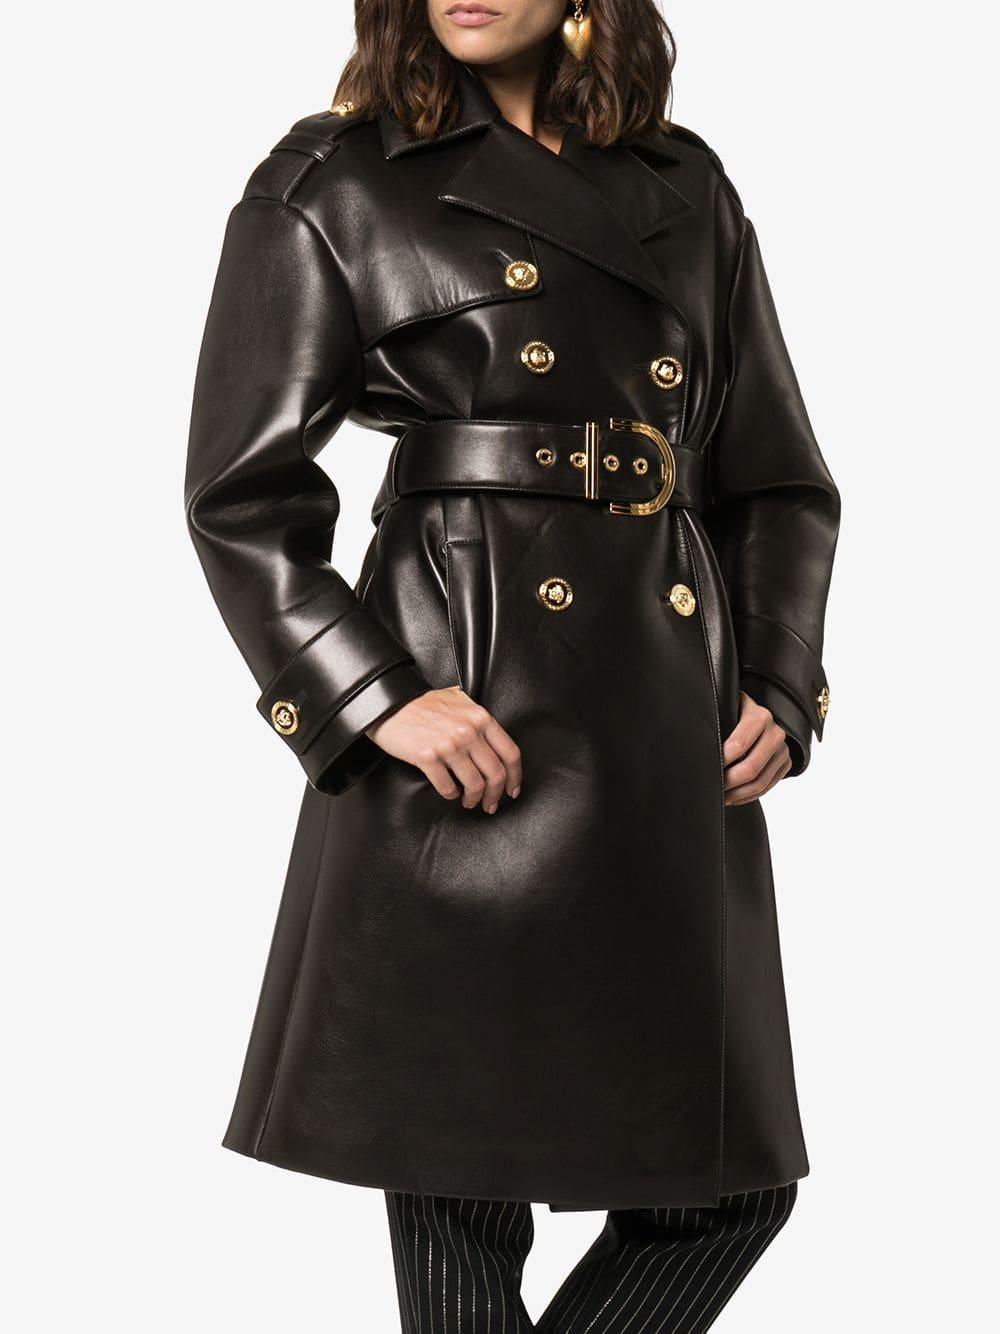 Versace Lambskin Leather Trench Coat in Black | Lyst